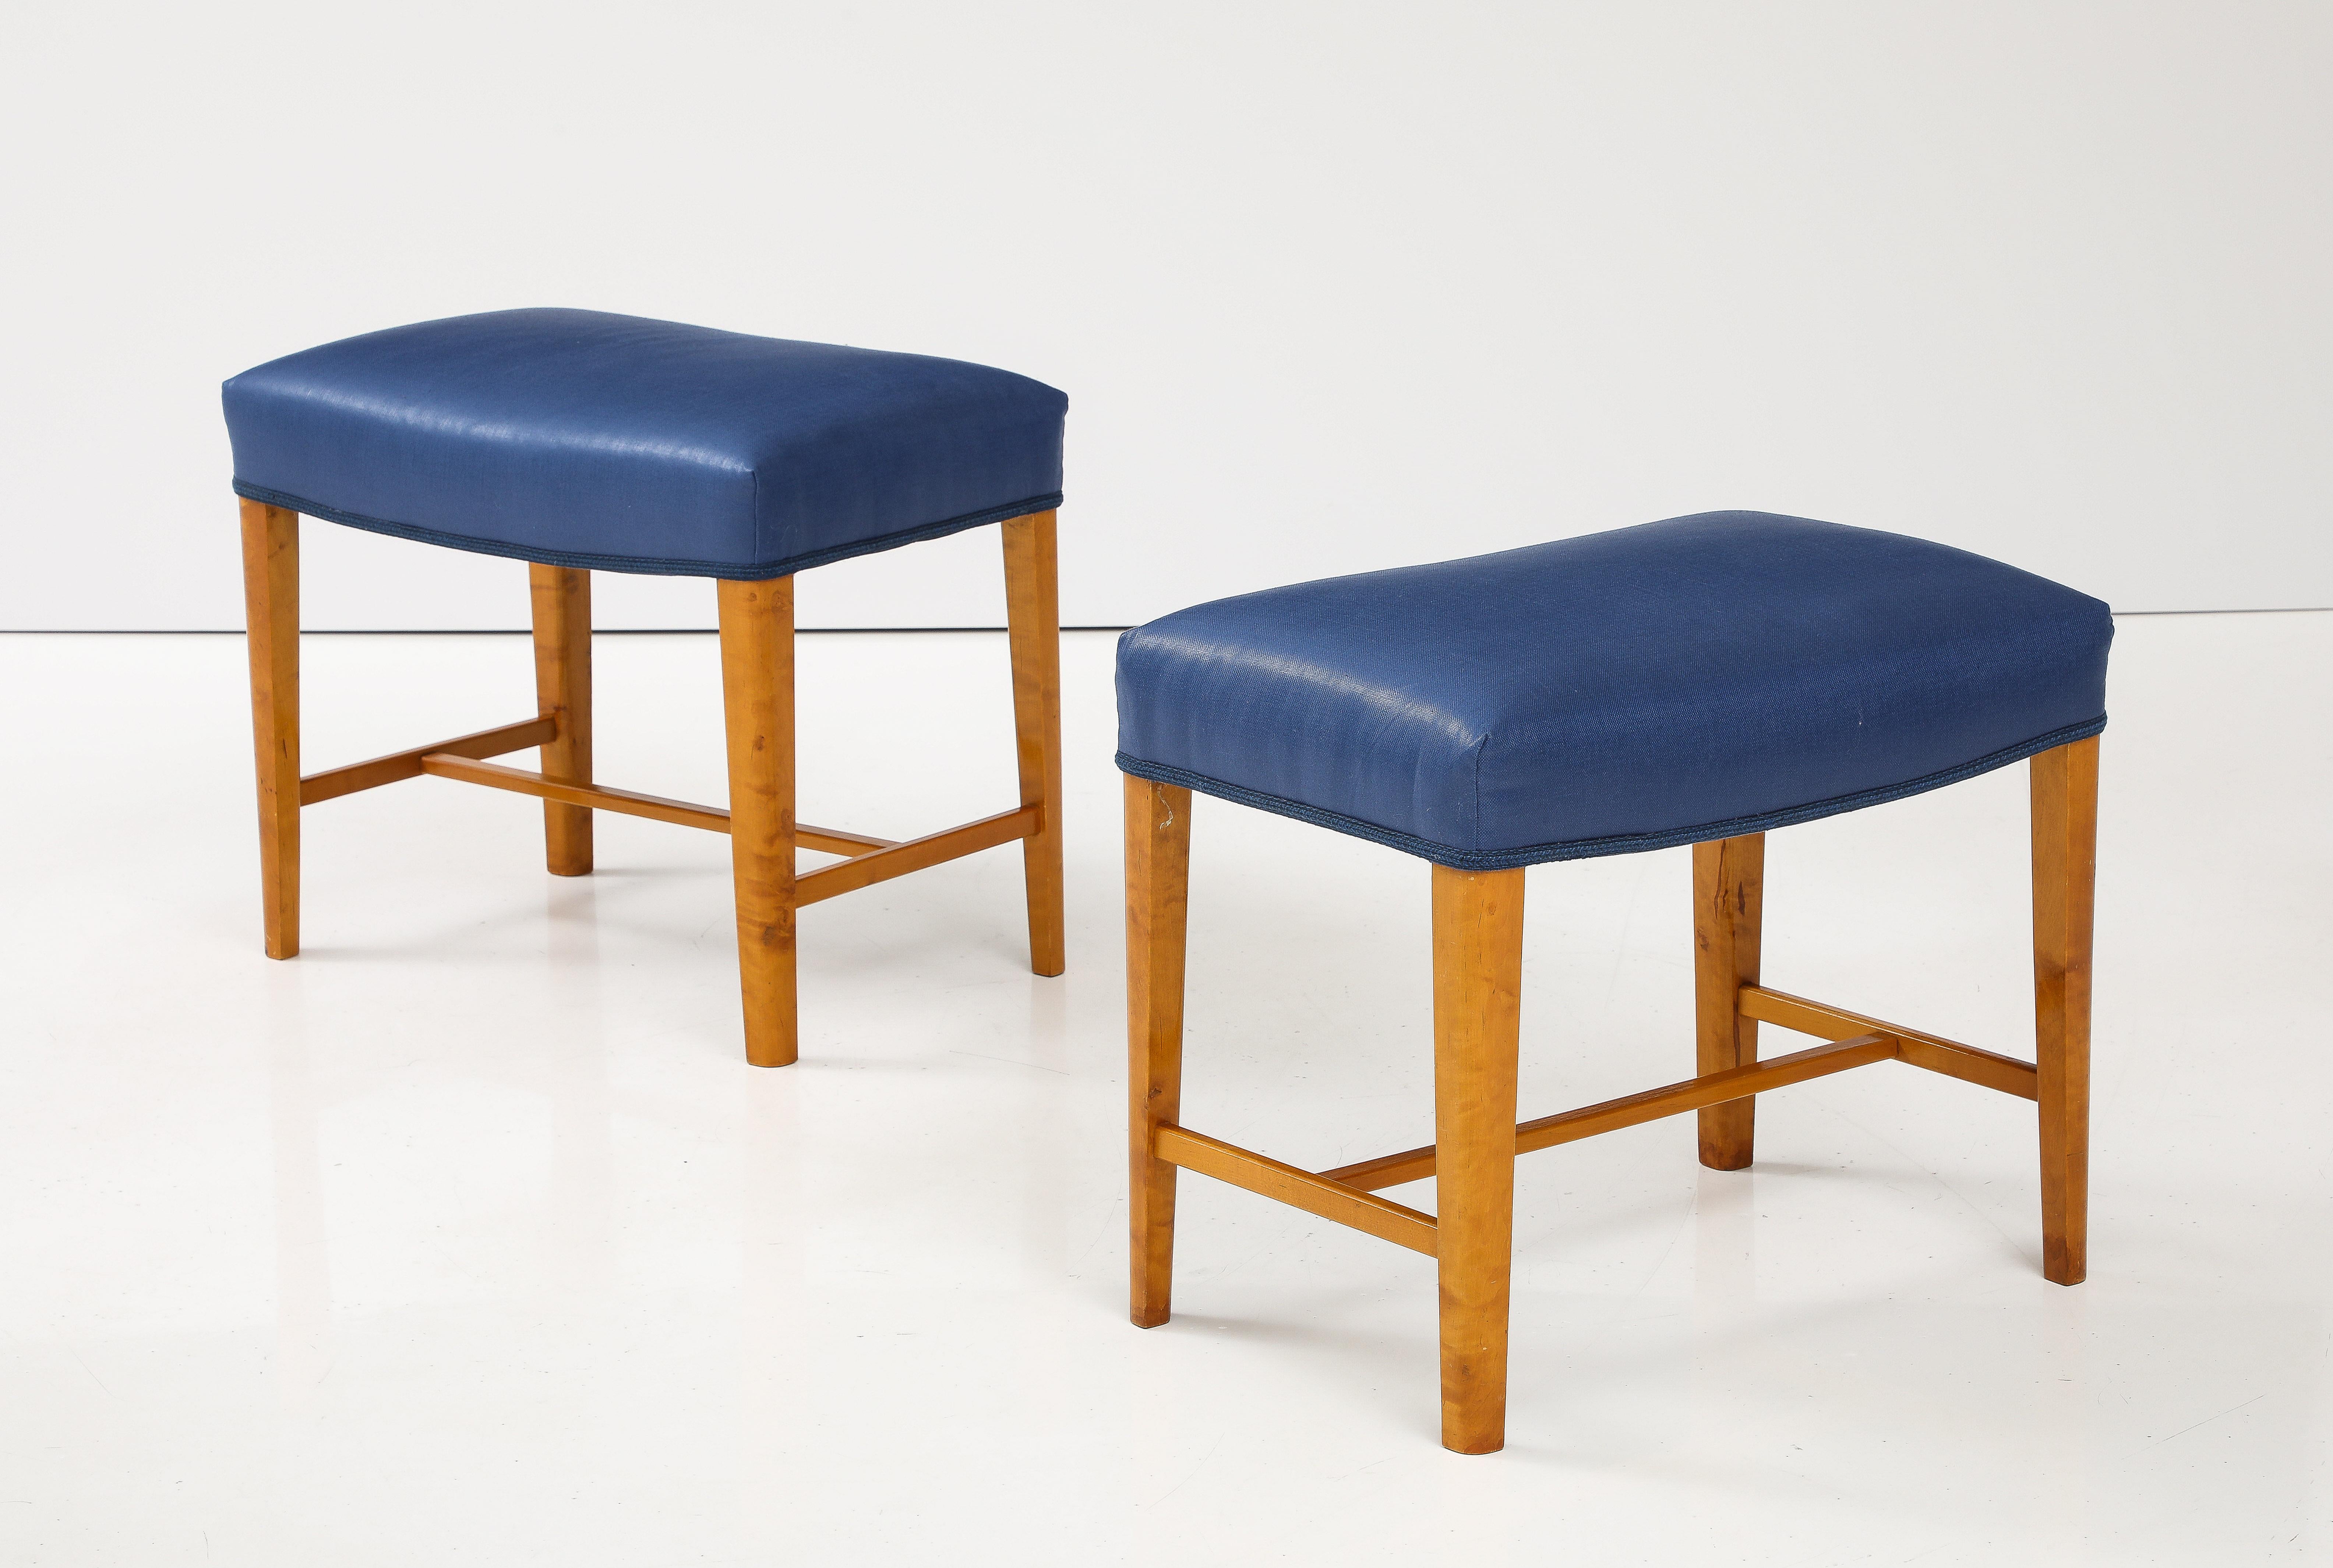 A pair of Swedish birch wood stools, Circa 1940s, the upholstered rectangular tops raised of straight legs with a rounded edge and joined by an H-form cross stretcher. Re-covered in Rogers & Goffigon glazed linen.